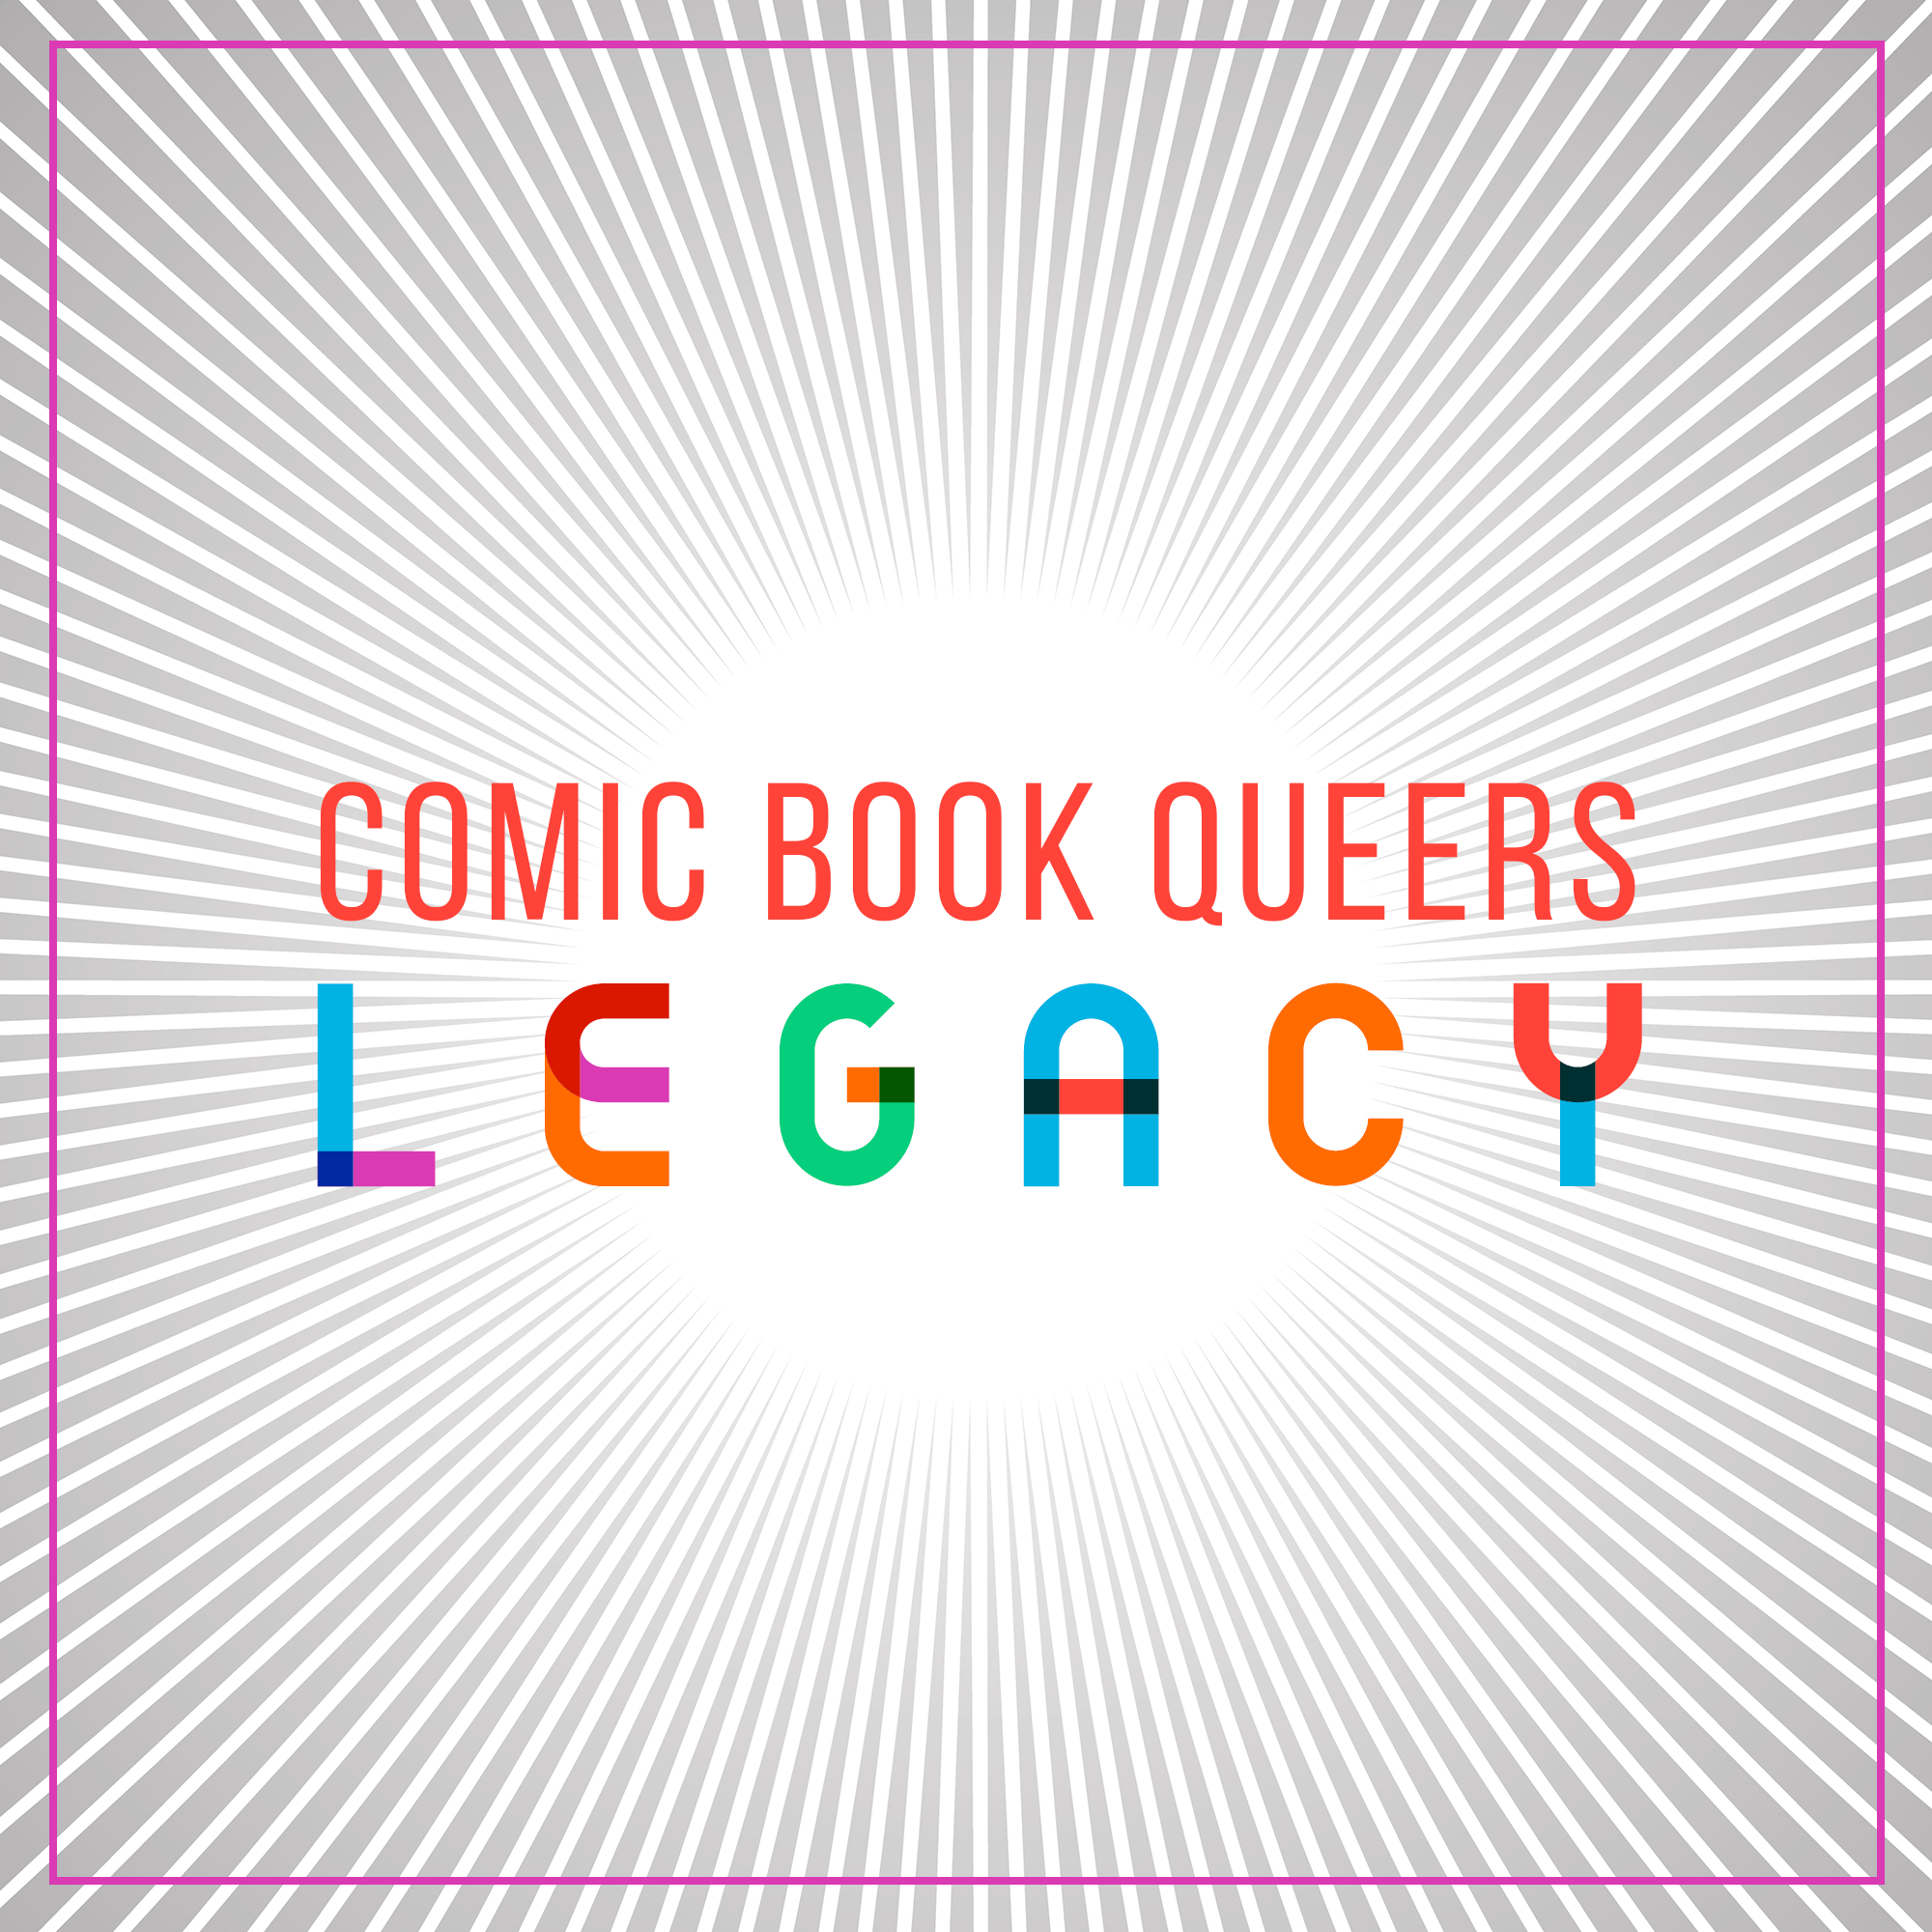 Comic Book Queers Legacy